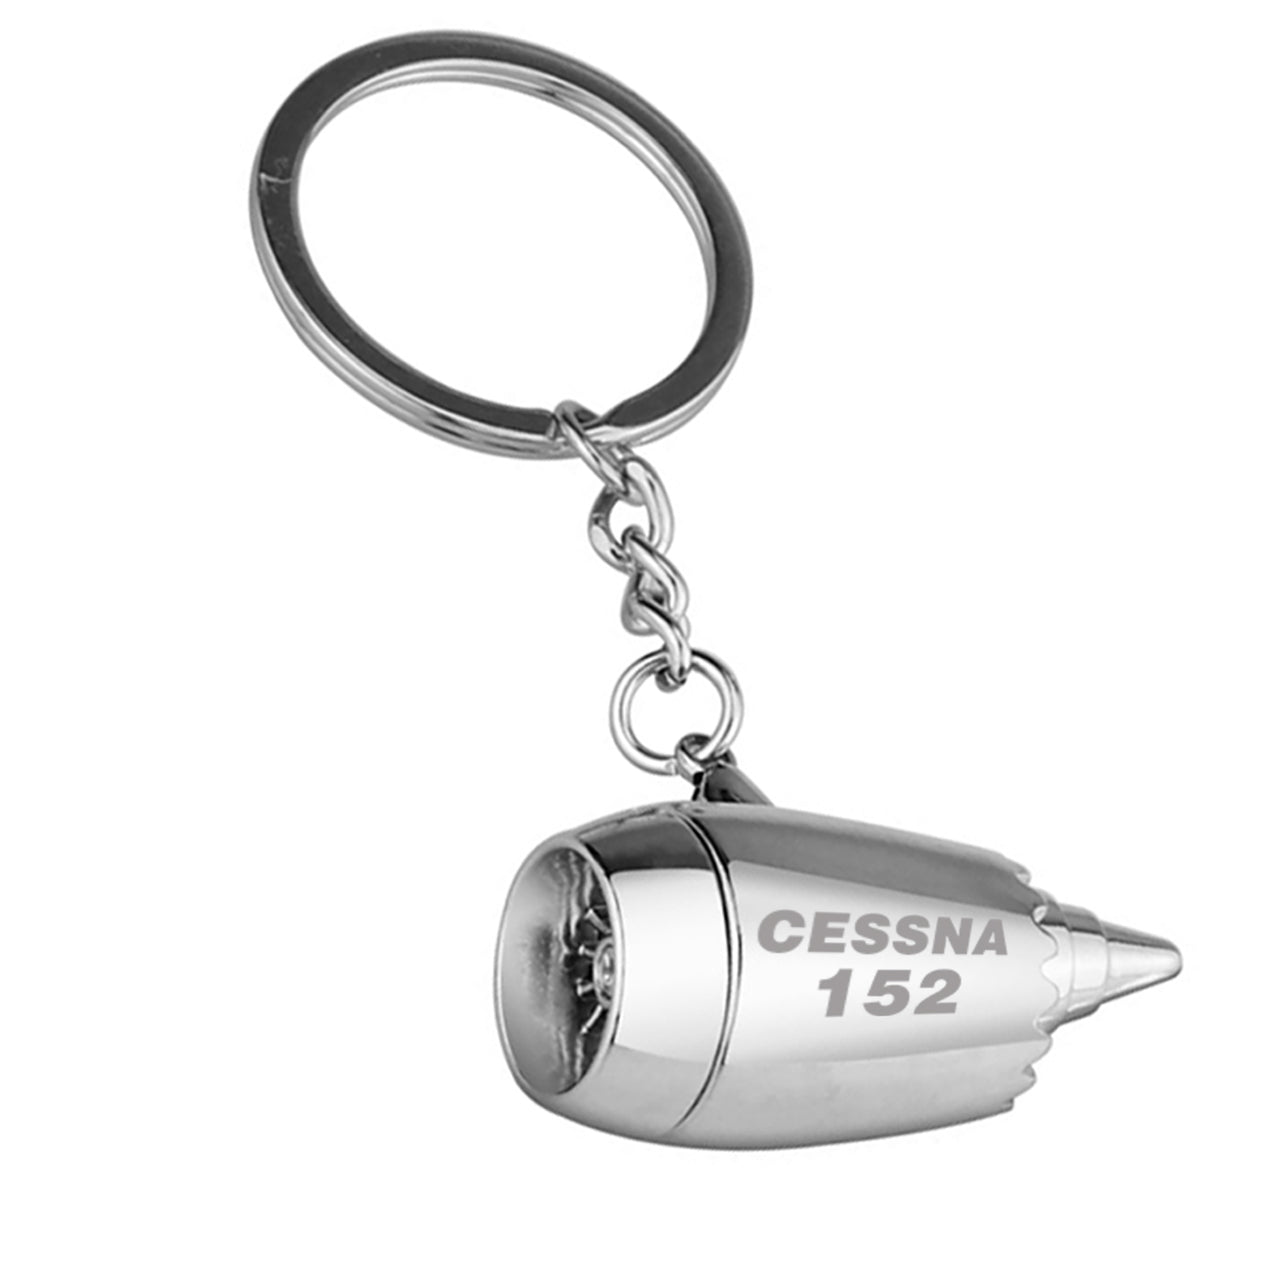 The Cessna 152 Designed Airplane Jet Engine Shaped Key Chain